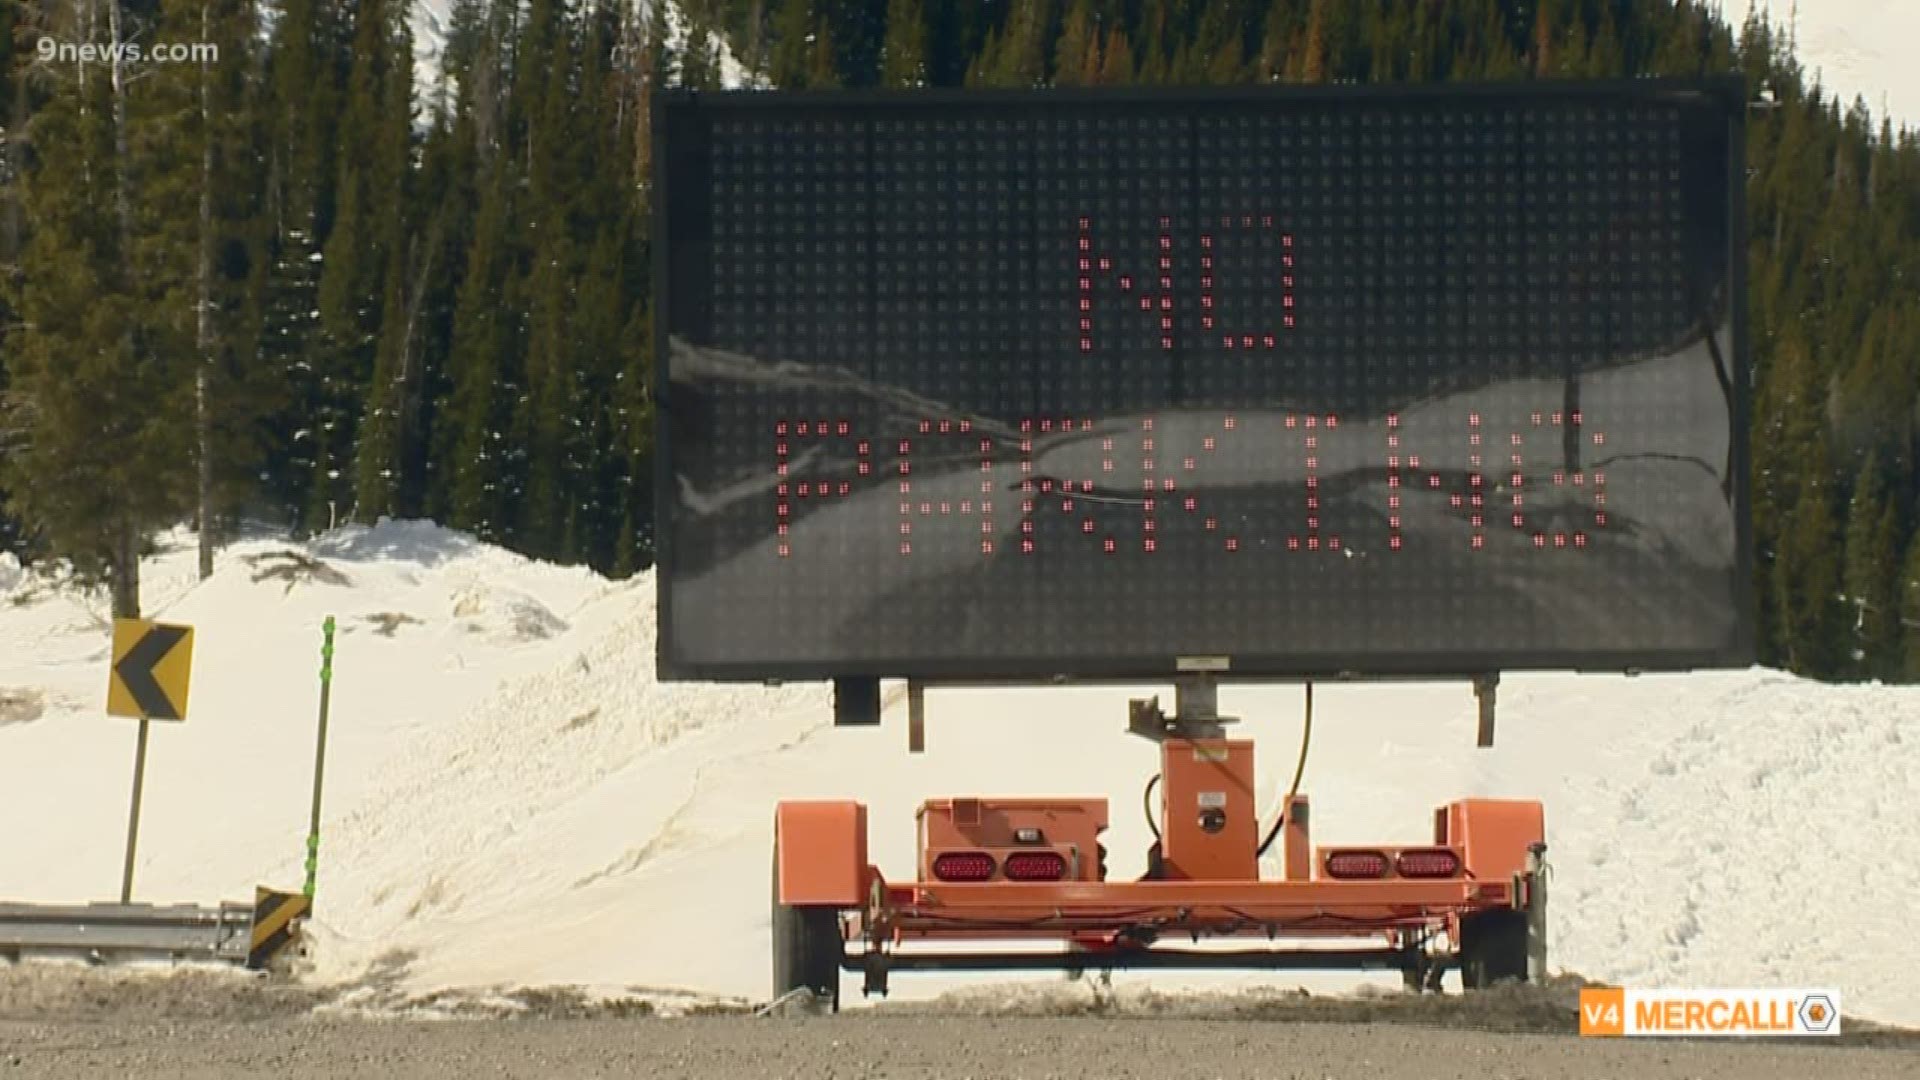 People have been crowding into the backcountry and parking in dangerous areas along the Loveland Pass and Berthoud. There will be increased enforcement this weekend.